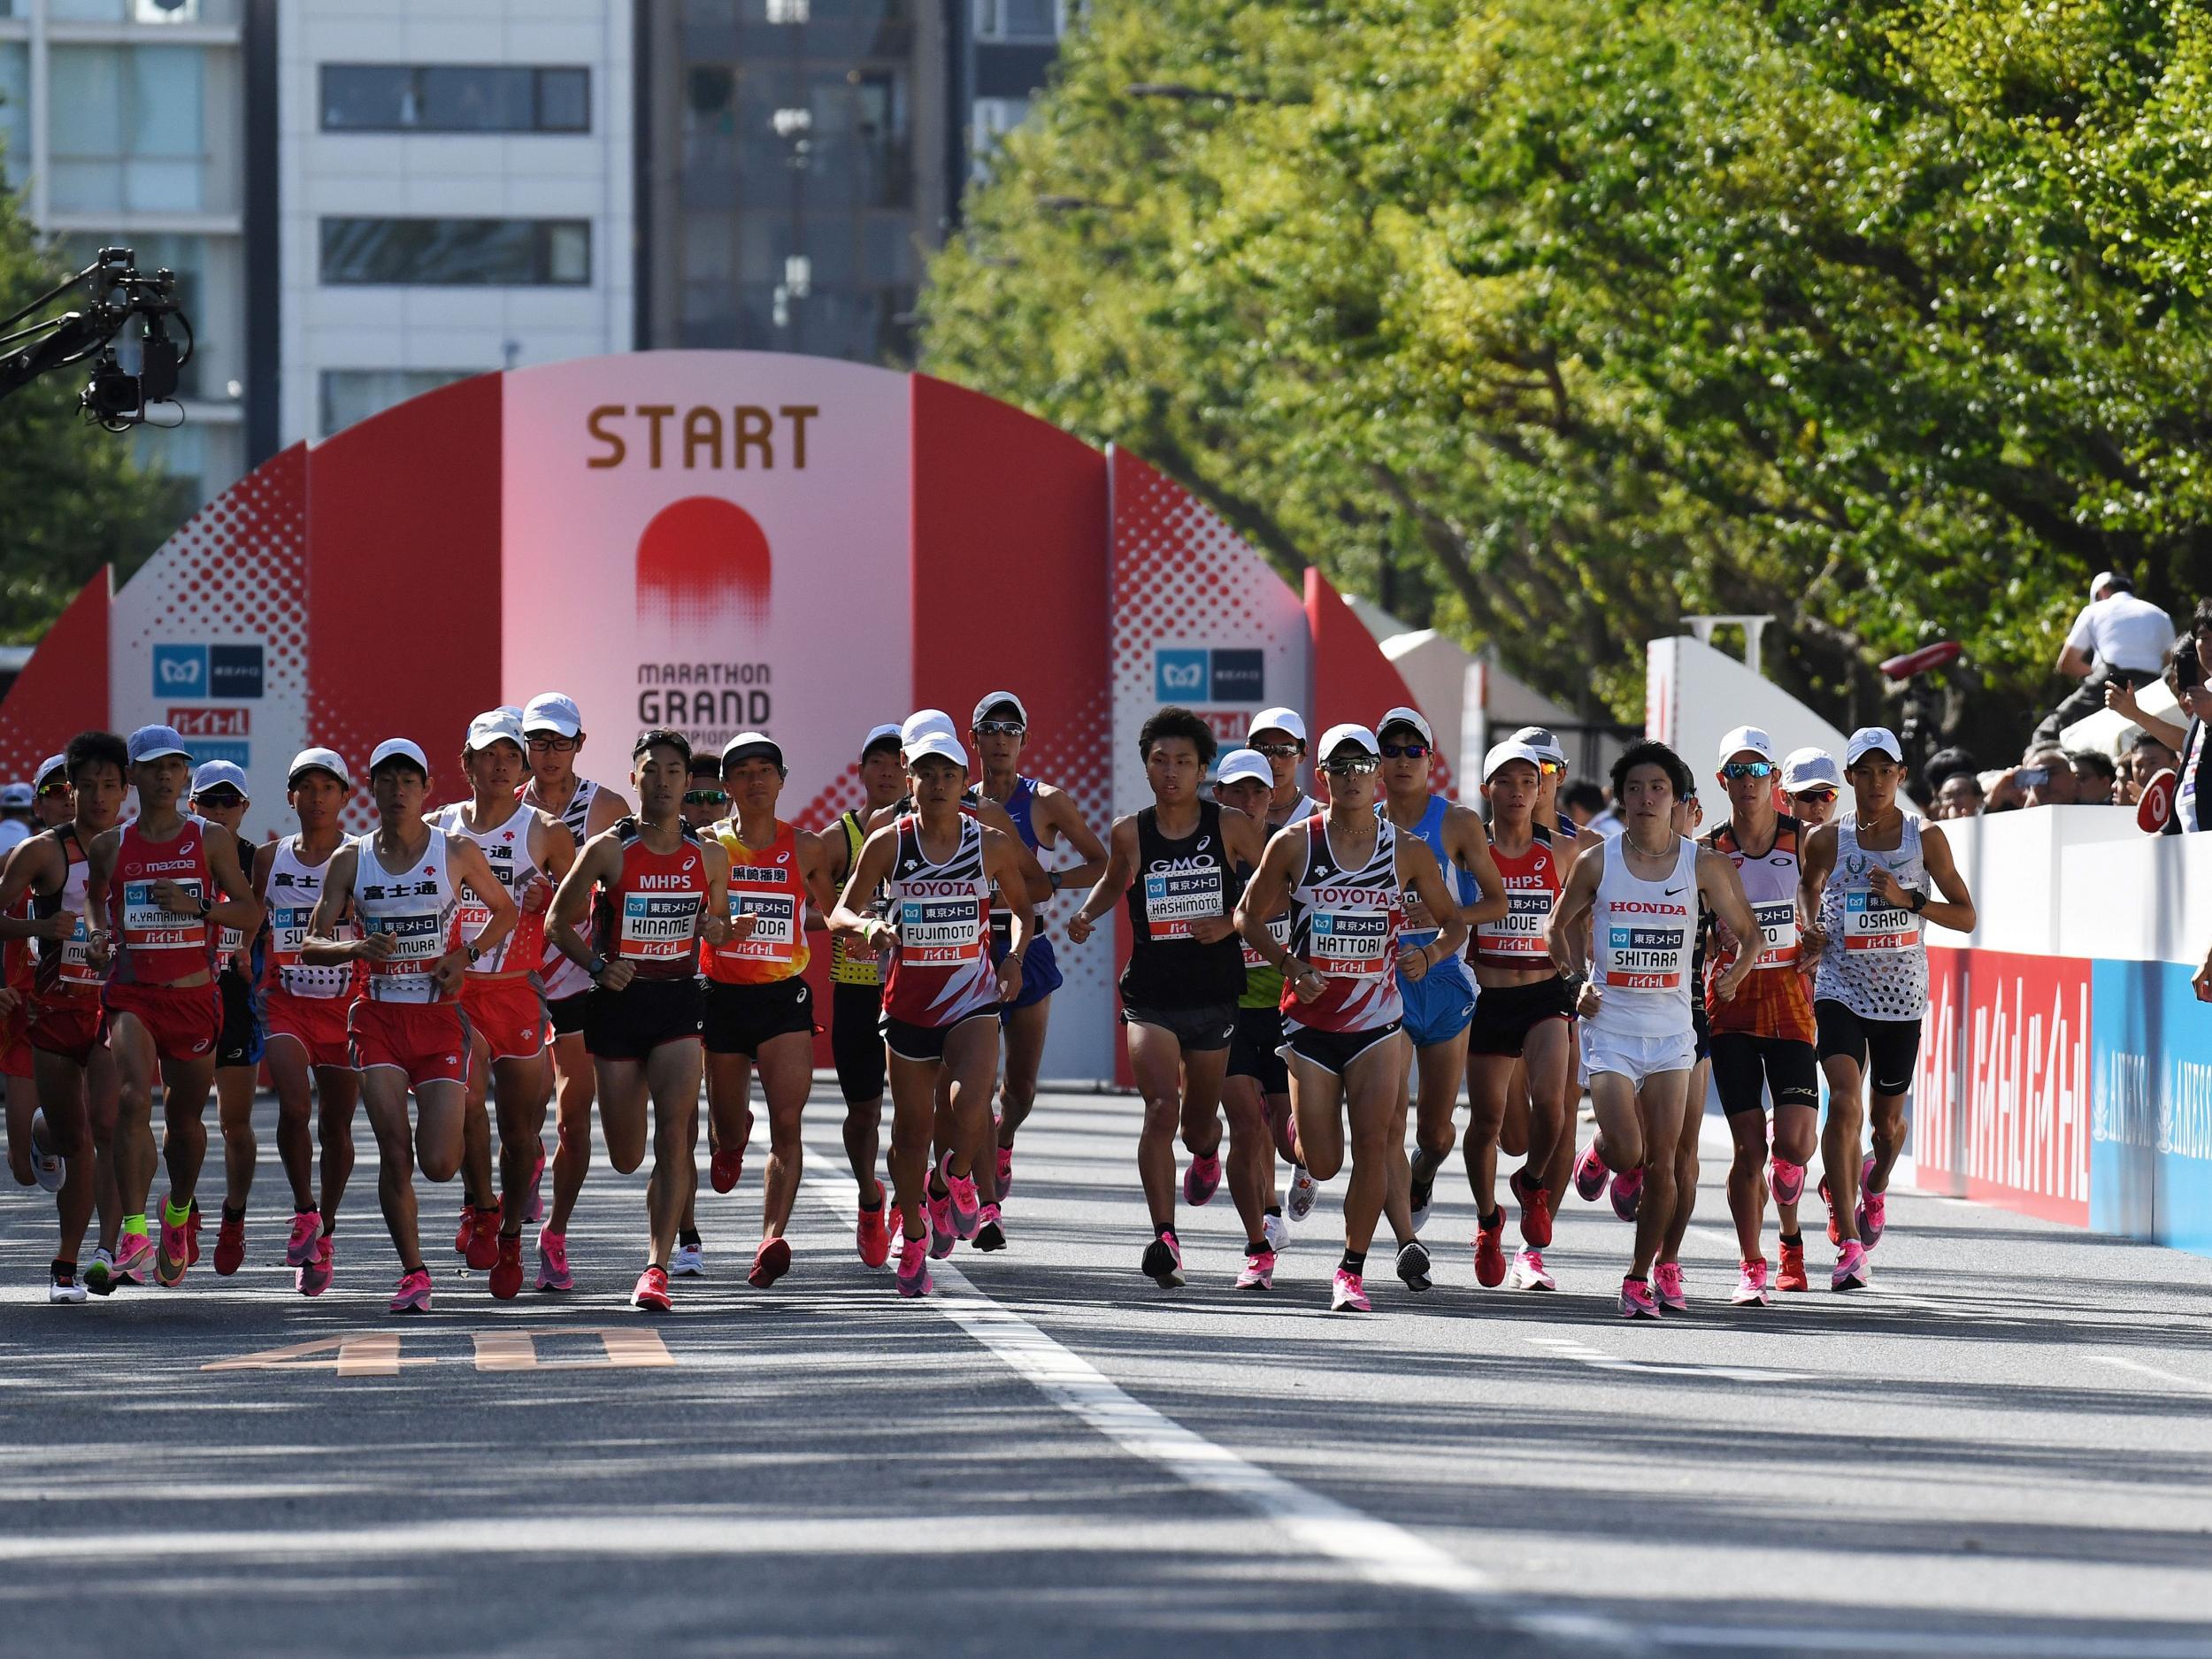 Athletes compete at the marathon test event for the 2020 Tokyo Olympic Games